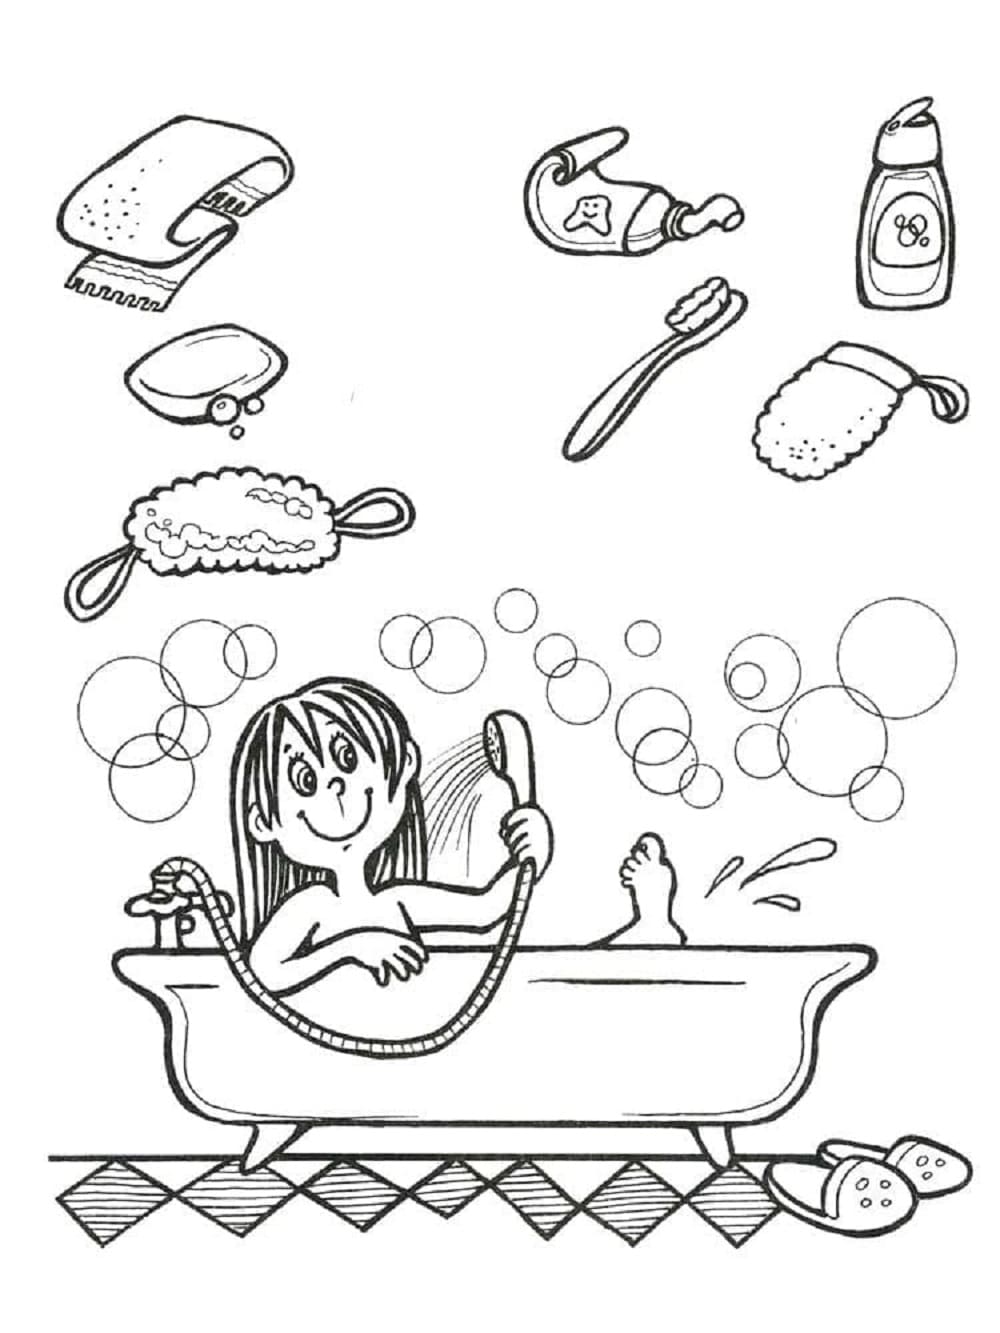 Printable Hygiene Download Free Coloring Page